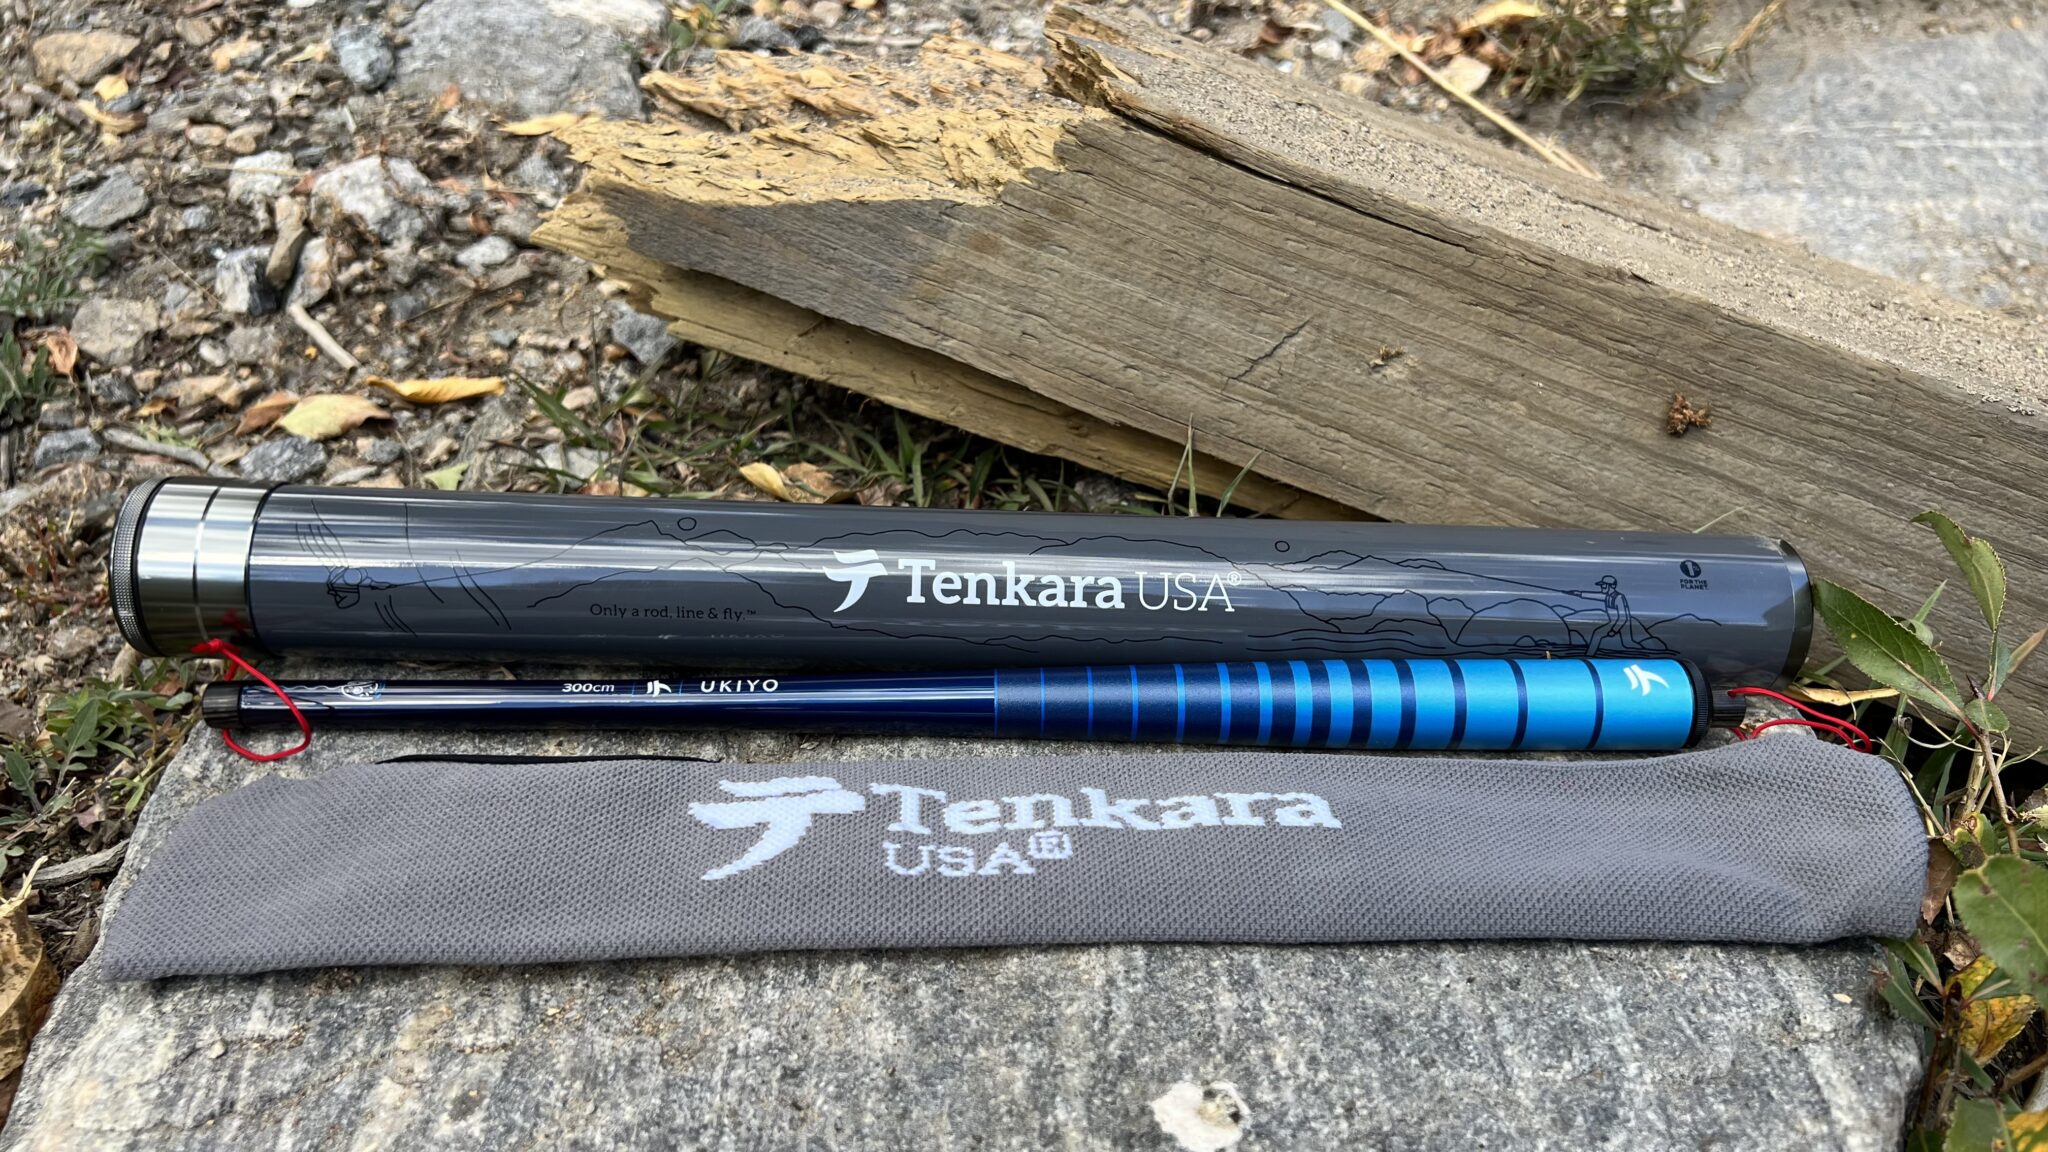 Recently picked up my first bamboo rod. I'm impressed with how